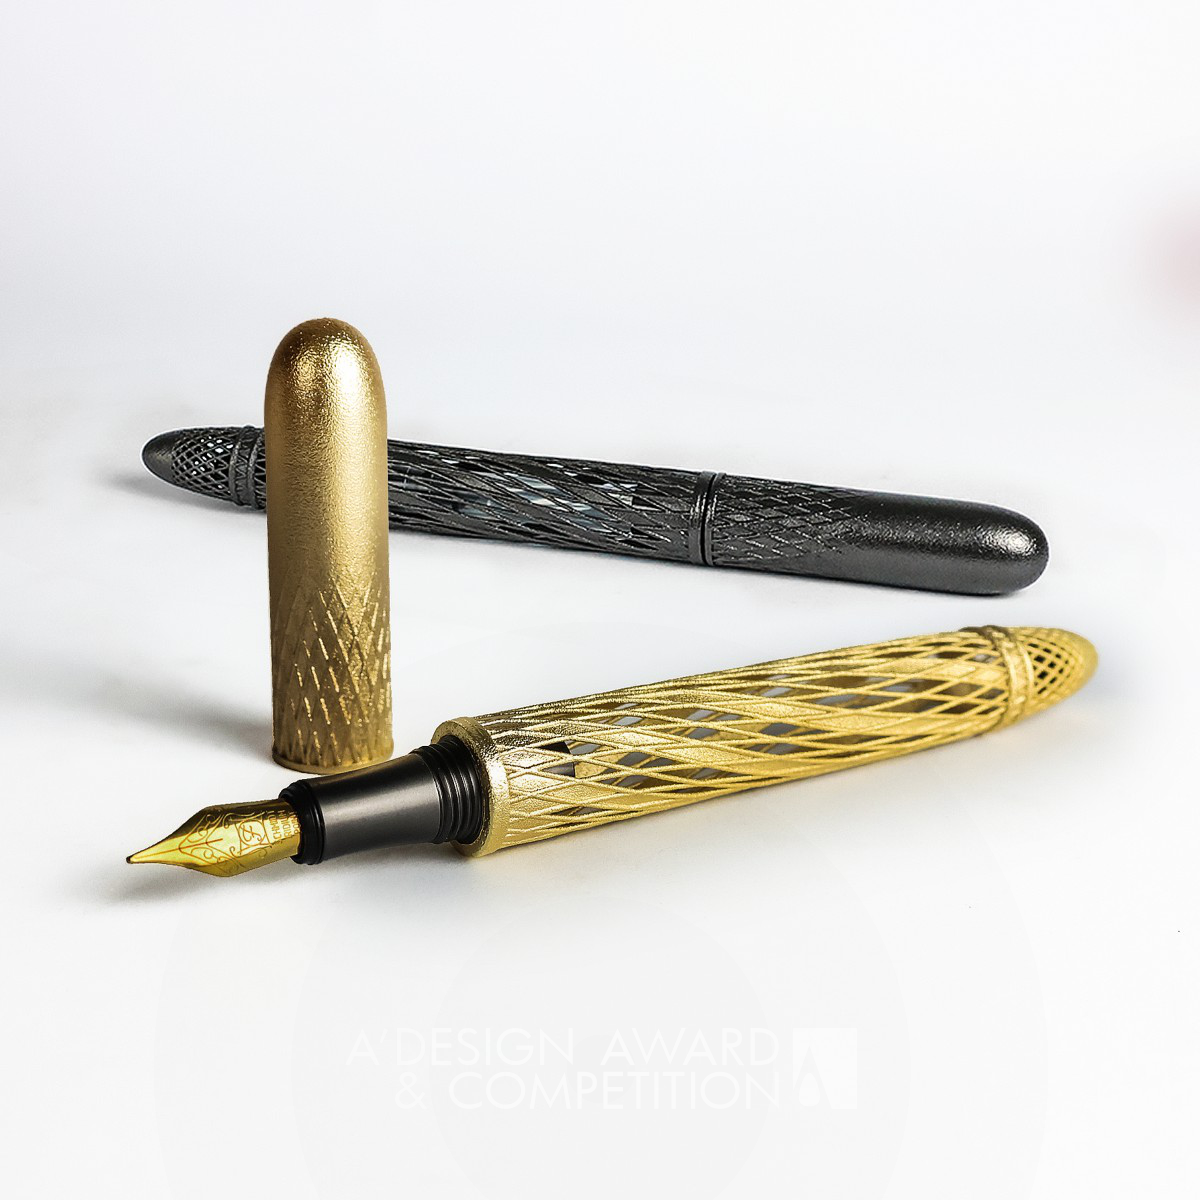 3D Buildmesh: Redefining Fountain Pens with Architectural Aesthetics